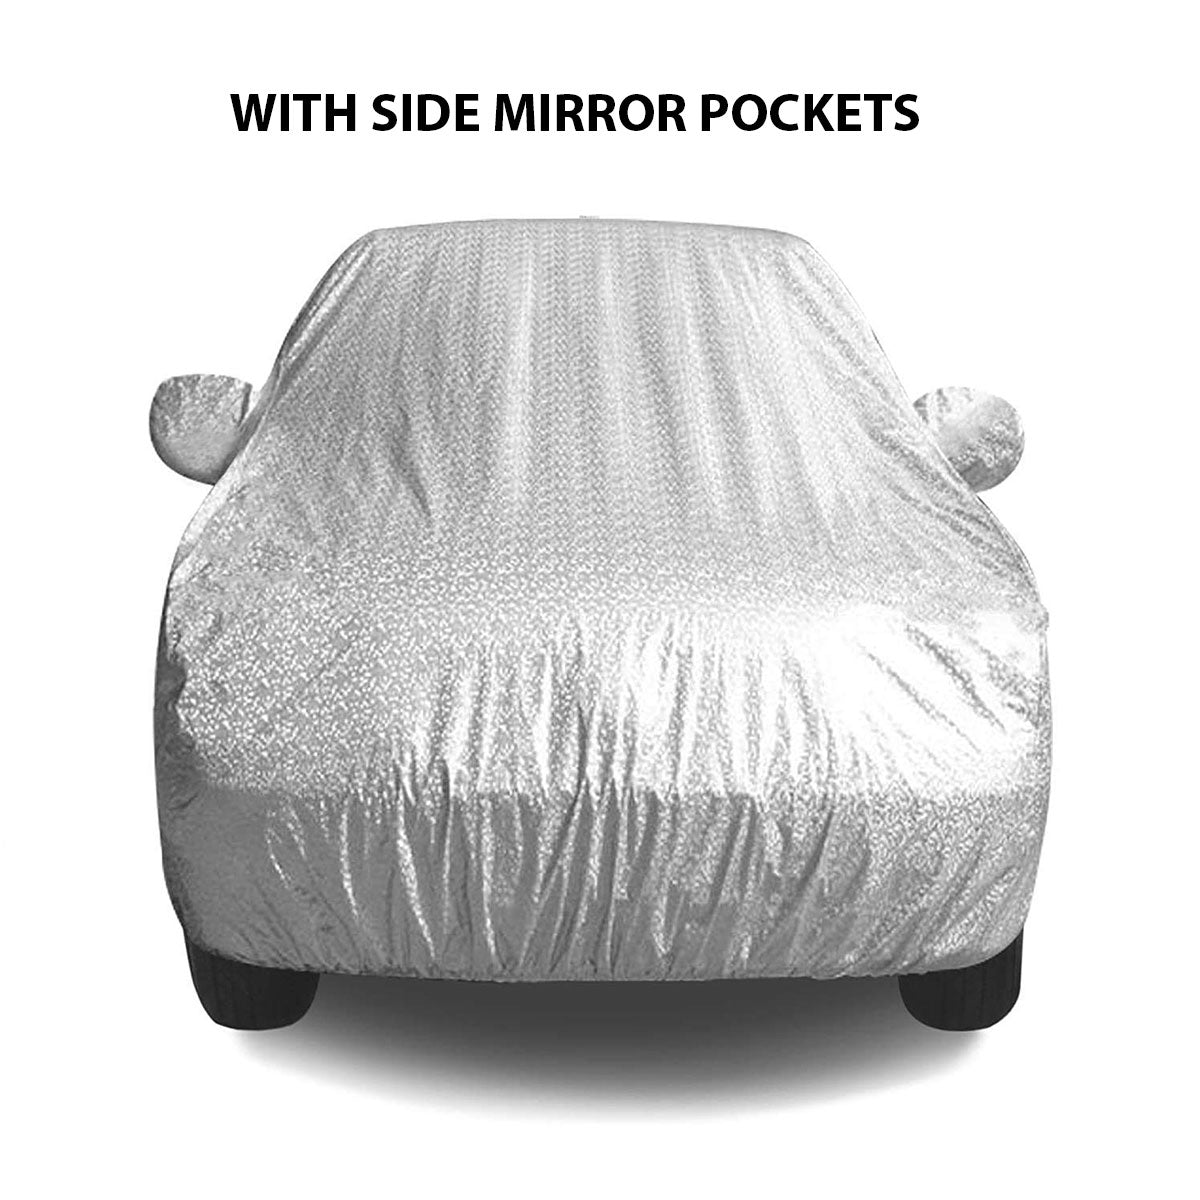 Oshotto Spyro Silver Anti Reflective, dustproof and Water Proof Car Body Cover with Mirror Pockets For Volkswagen Jetta